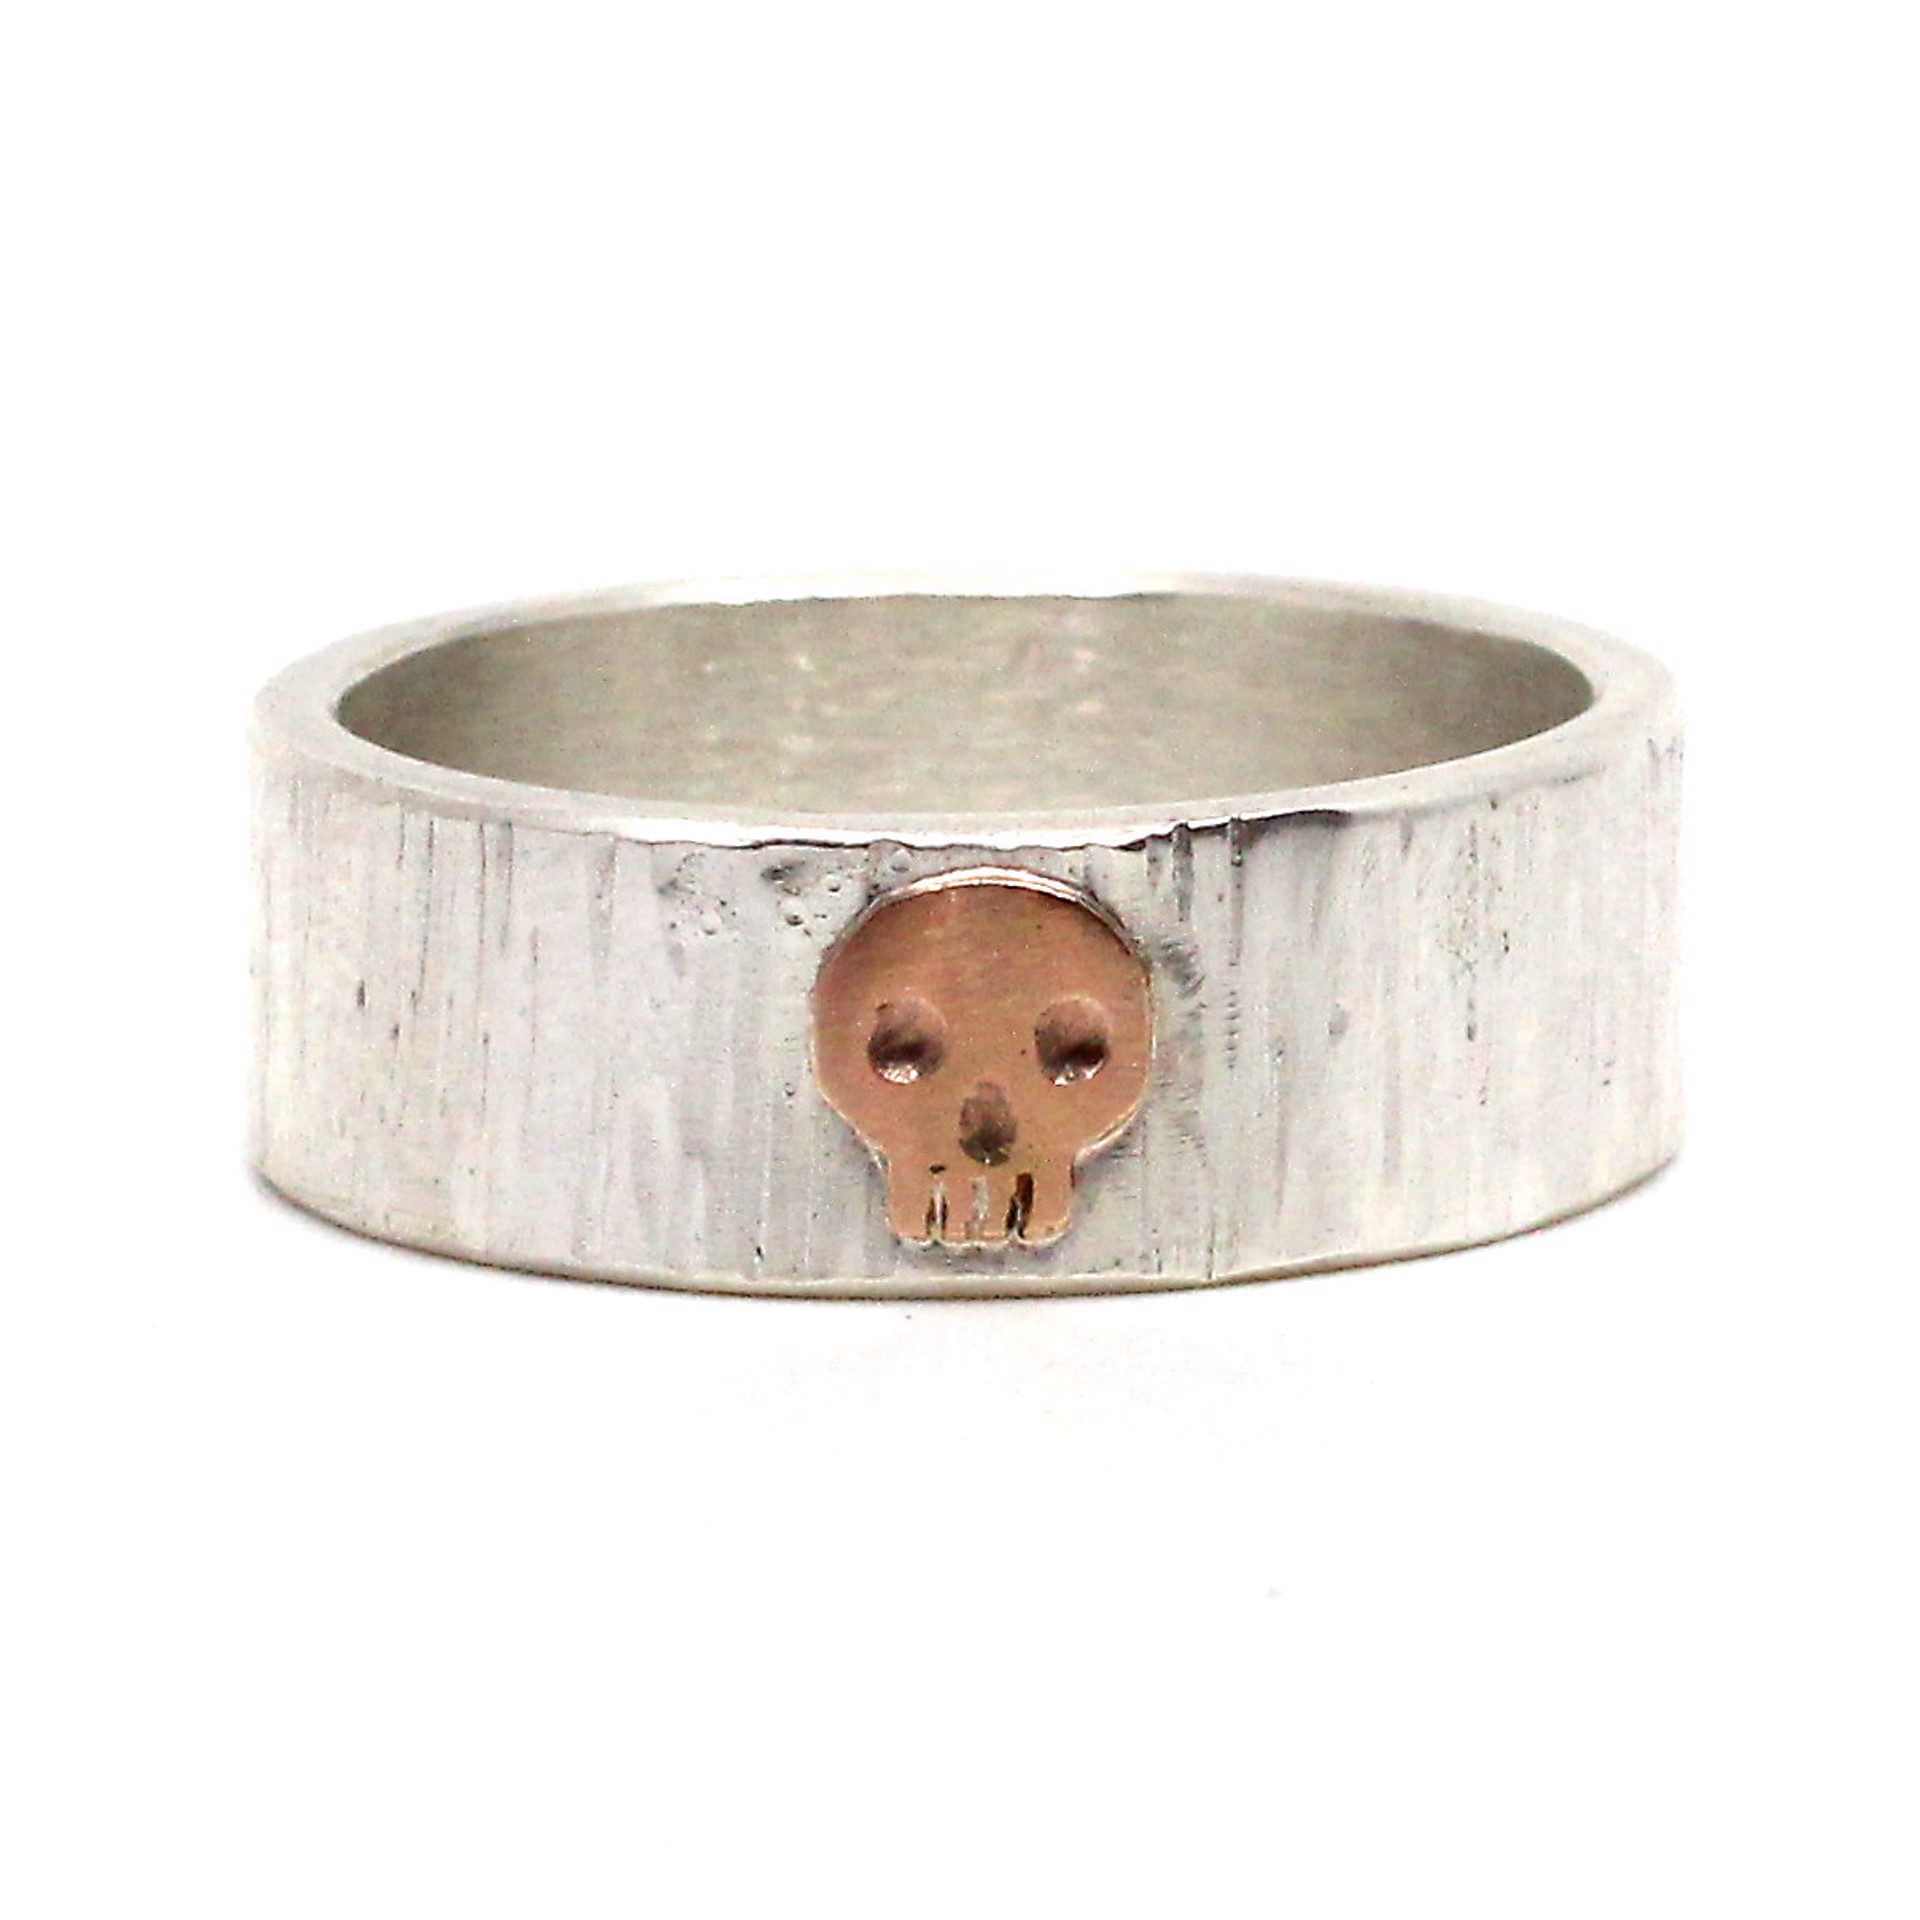 Single Skull Ring (Size 8.75) by Susan Elnora